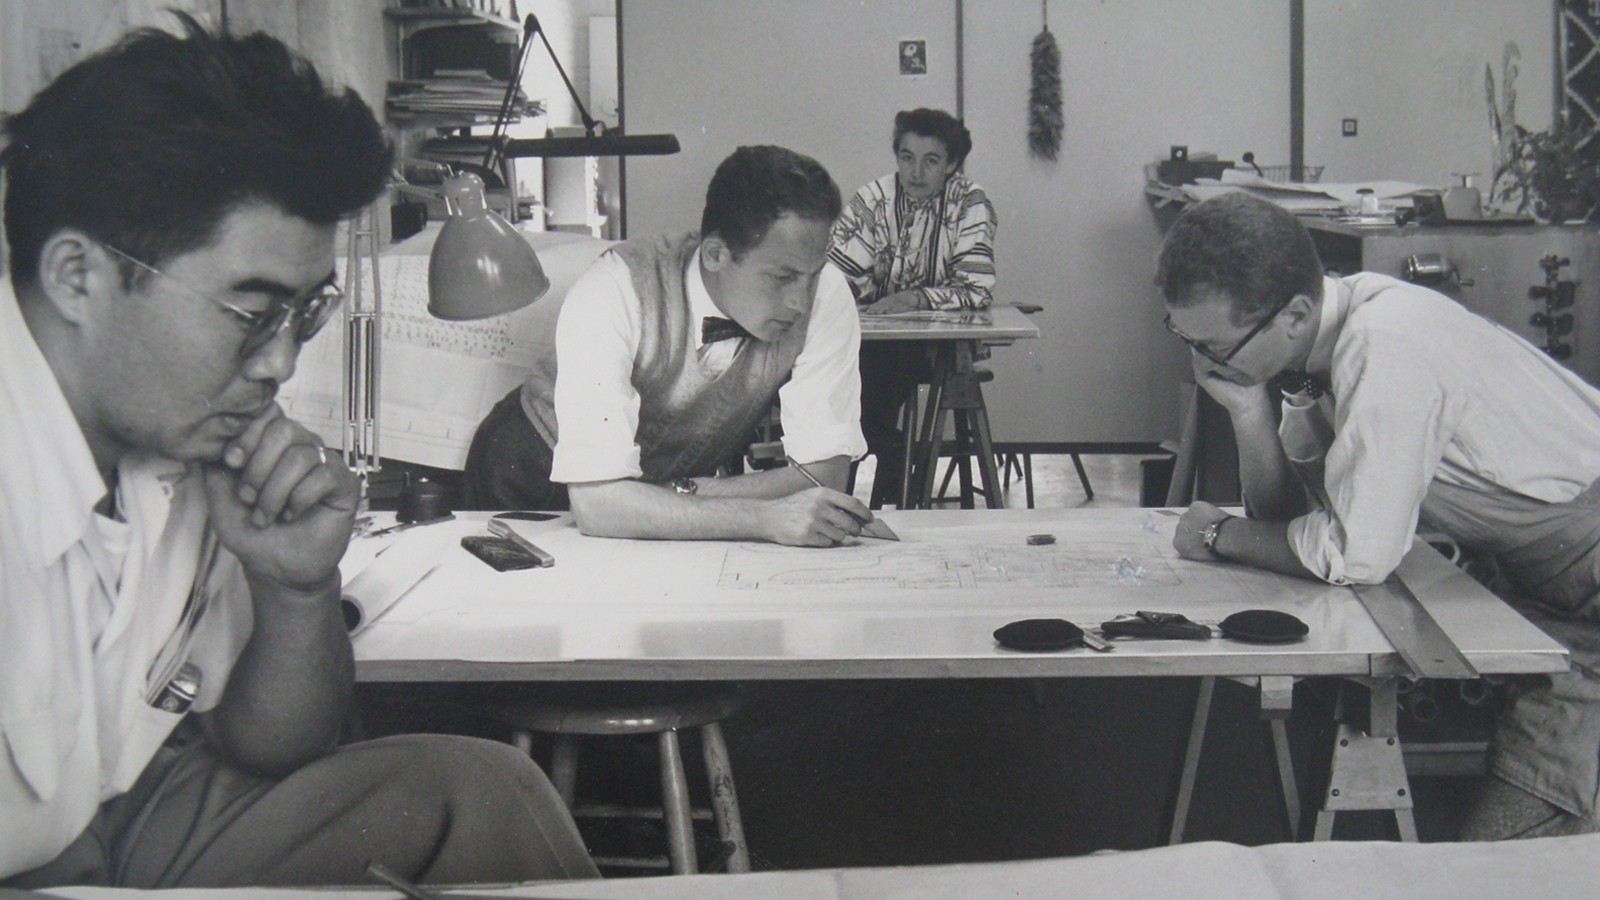 Jean Walton in Lawrence Halprin's Office - Photo courtesy of the Architectural Archives of the University of Pennsylvania